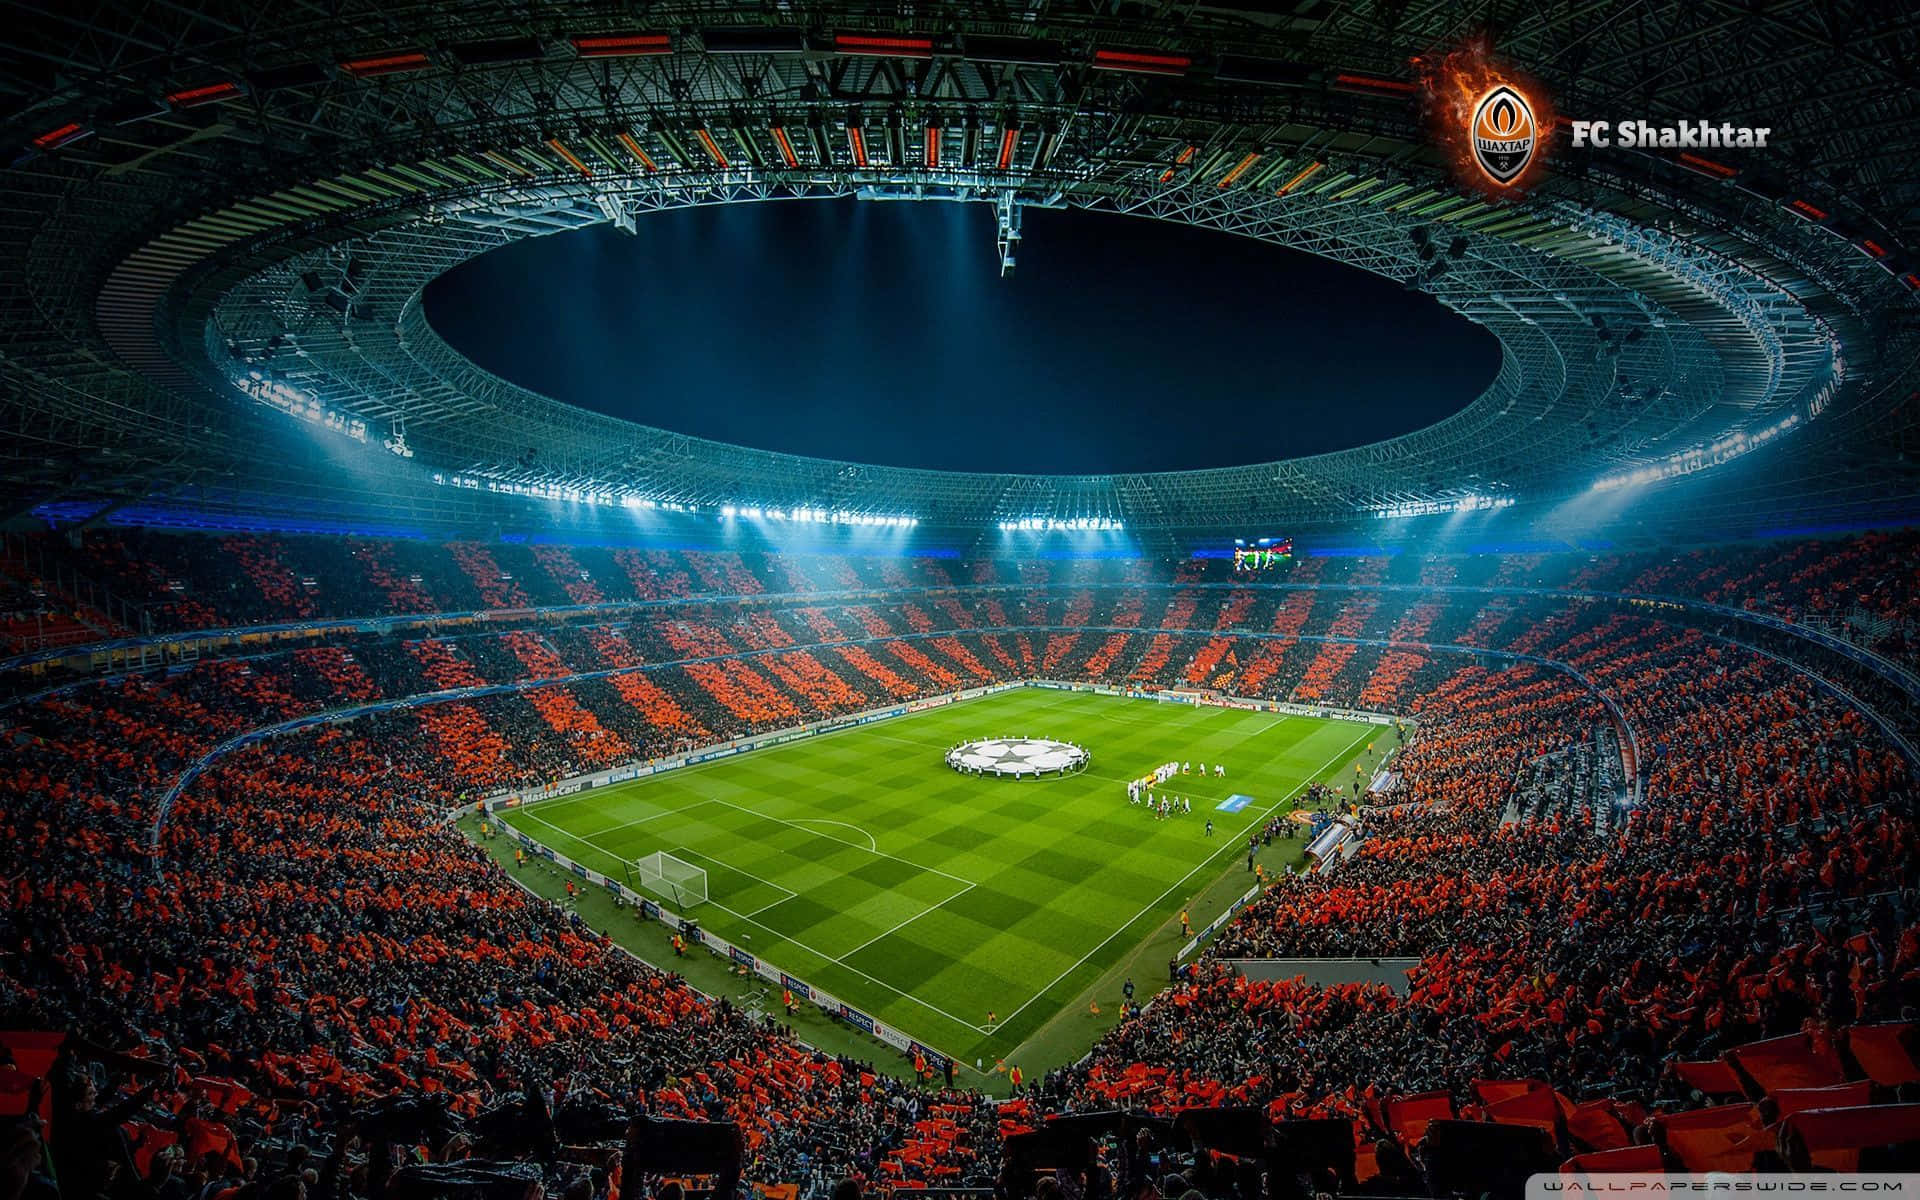 Enjoy the Beautiful Atmosphere at the Soccer Stadium! Wallpaper